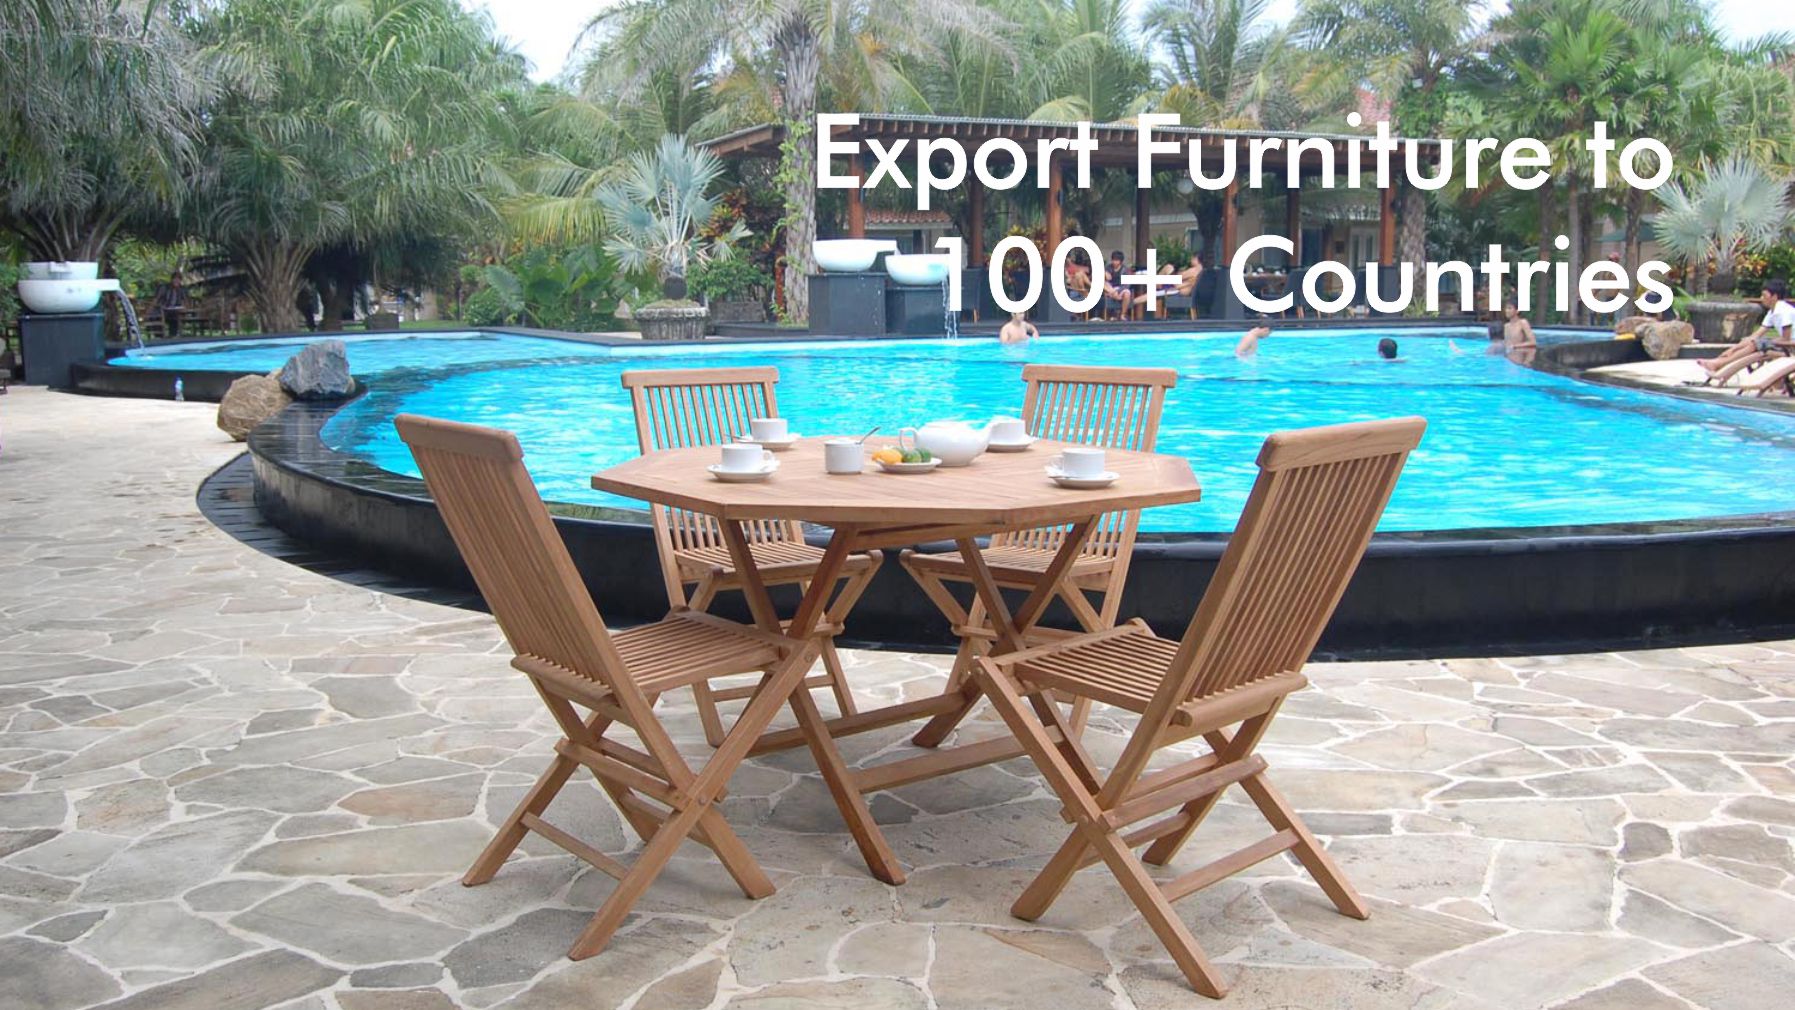 Exported Furniture to 100+ Countries